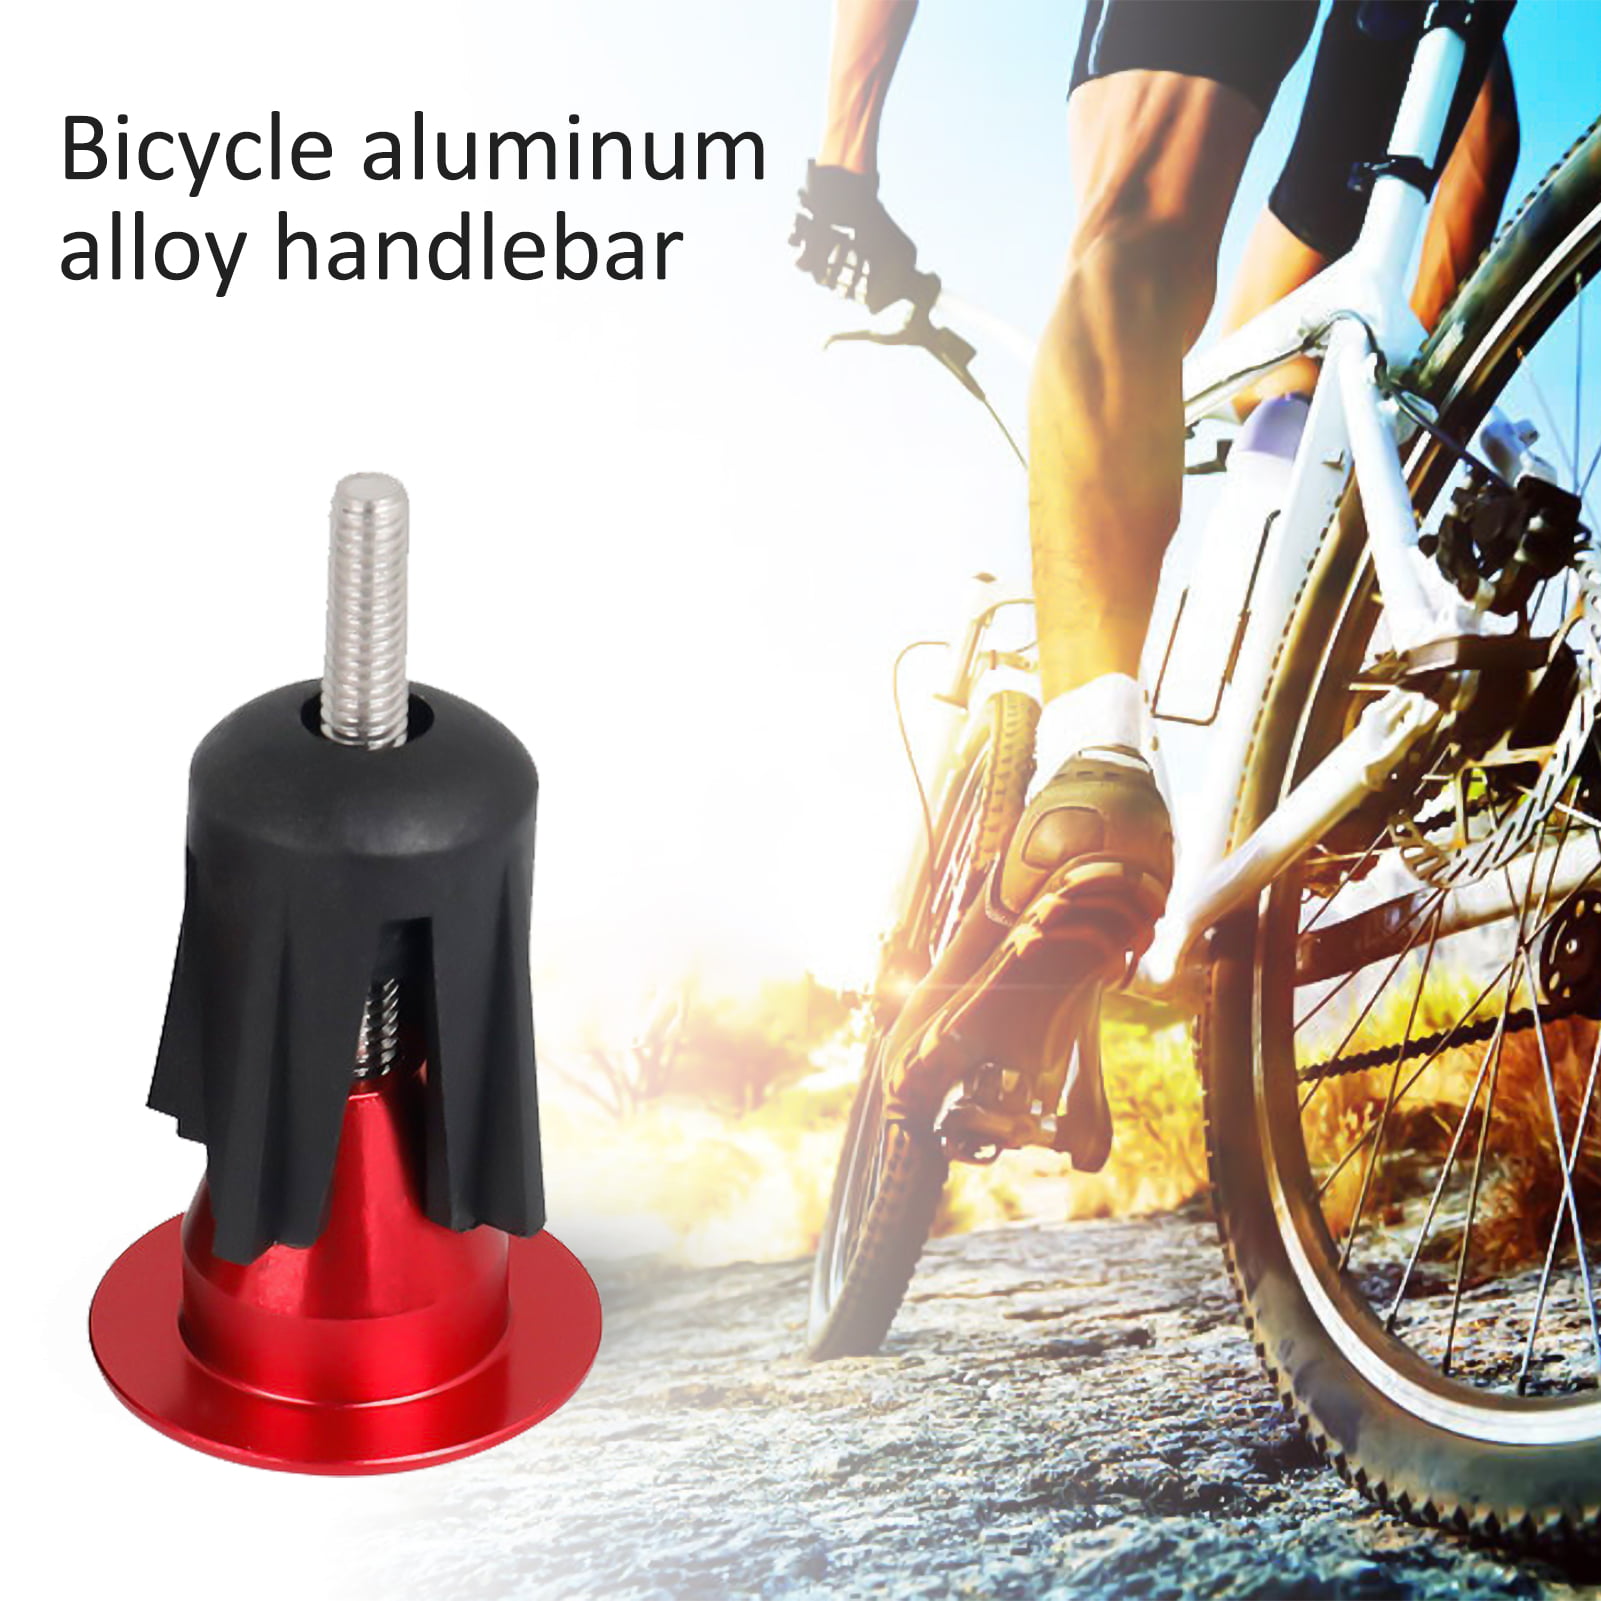 Details about   11T 2X Bicycle Aluminum Alloy Guiding Wheel MTB Bike Accessories Gear Cycling US 